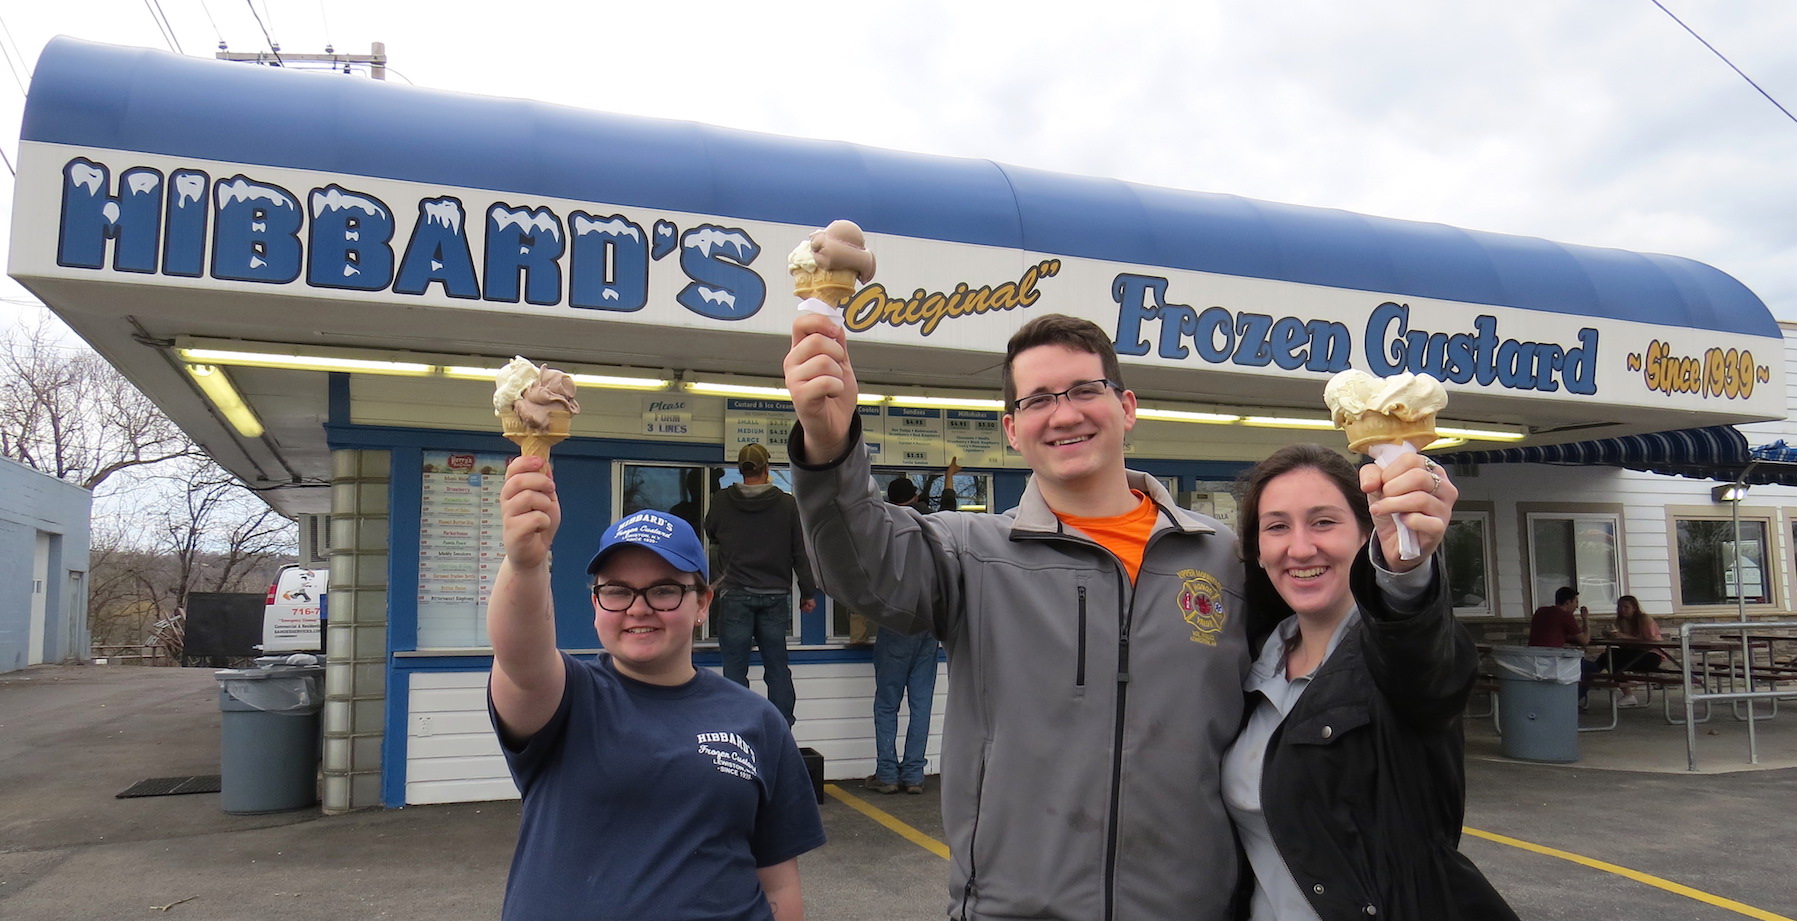 Max Jacobson of Lewiston and Emily Virgil of Rochester celebrate their first Hibbard's Original Frozen Custard stop of the season on Monday. Employee Gabby Ott joins them outside the stand.